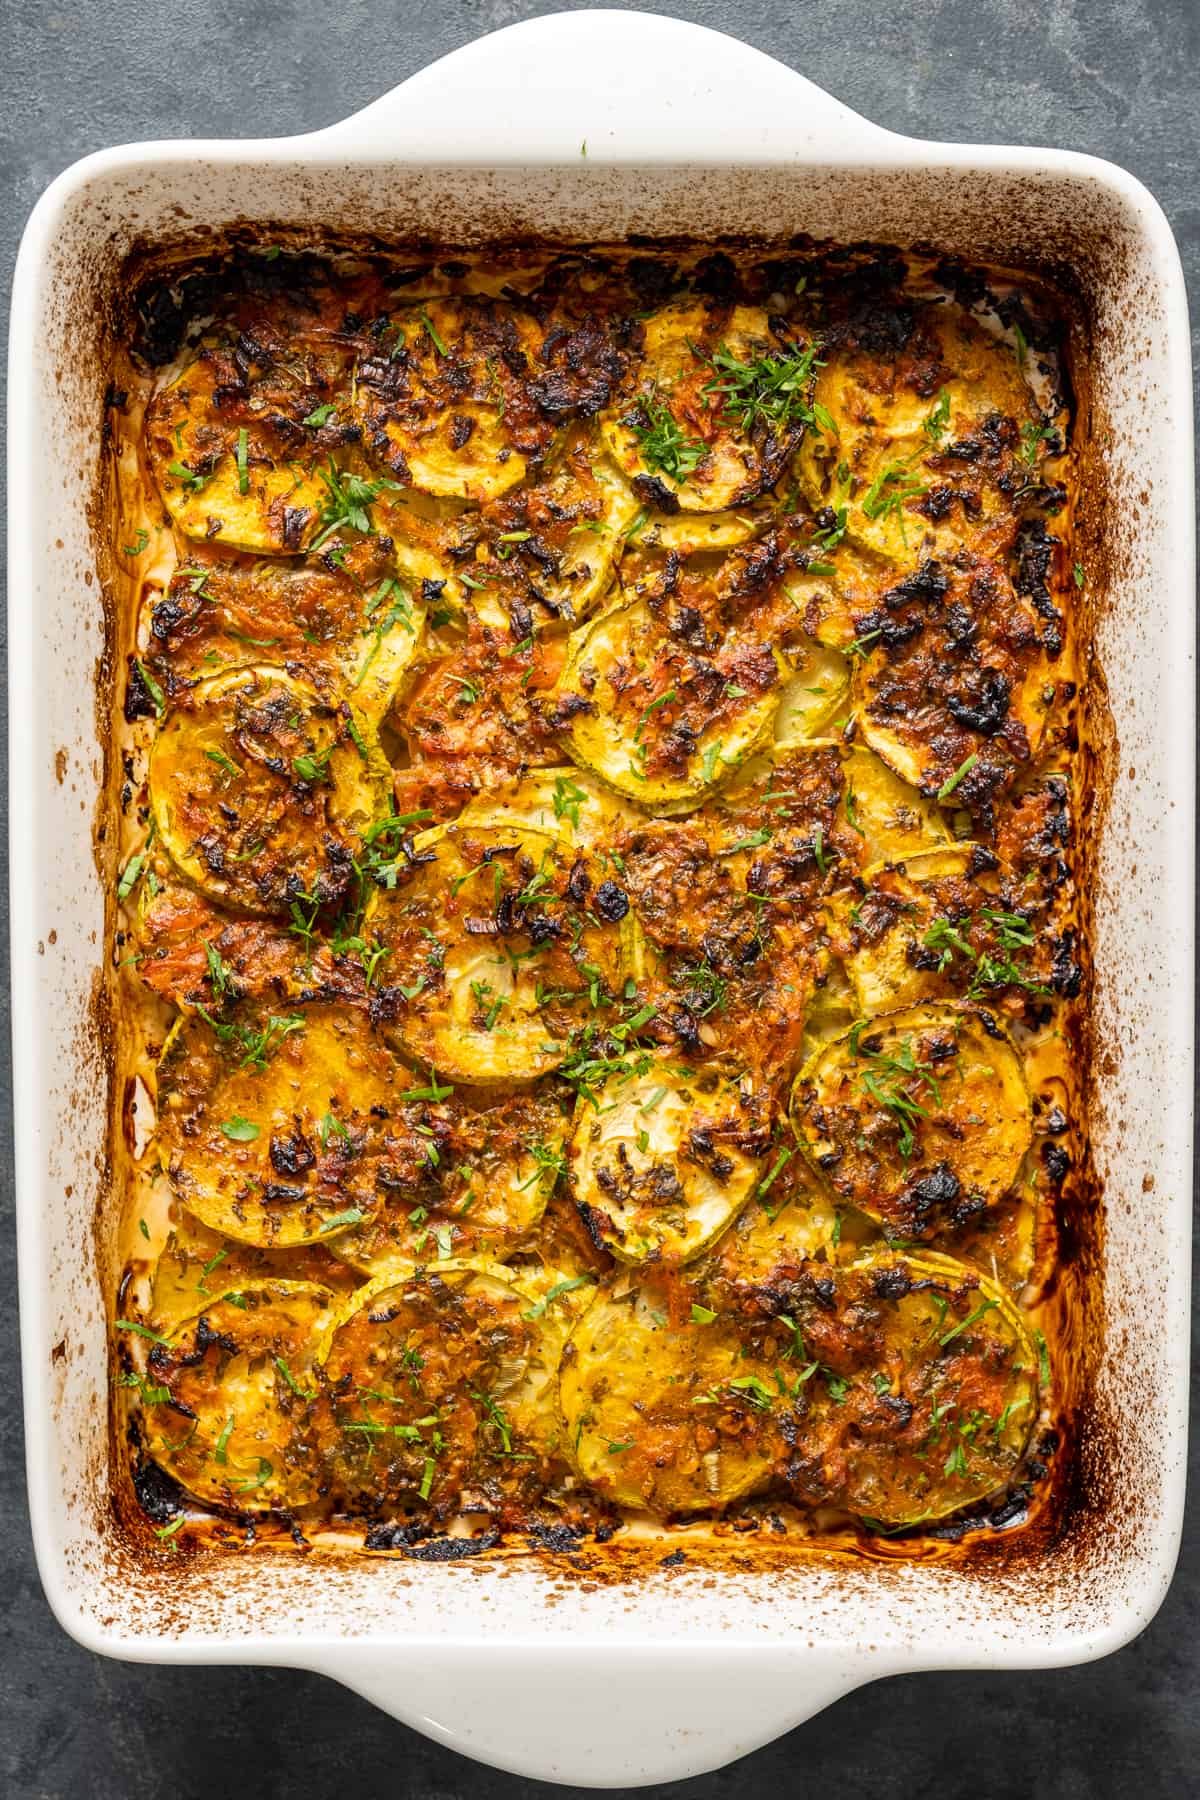 Zucchini tomato casserole with garlic and herbs baked with a golden top in a white baking pan.